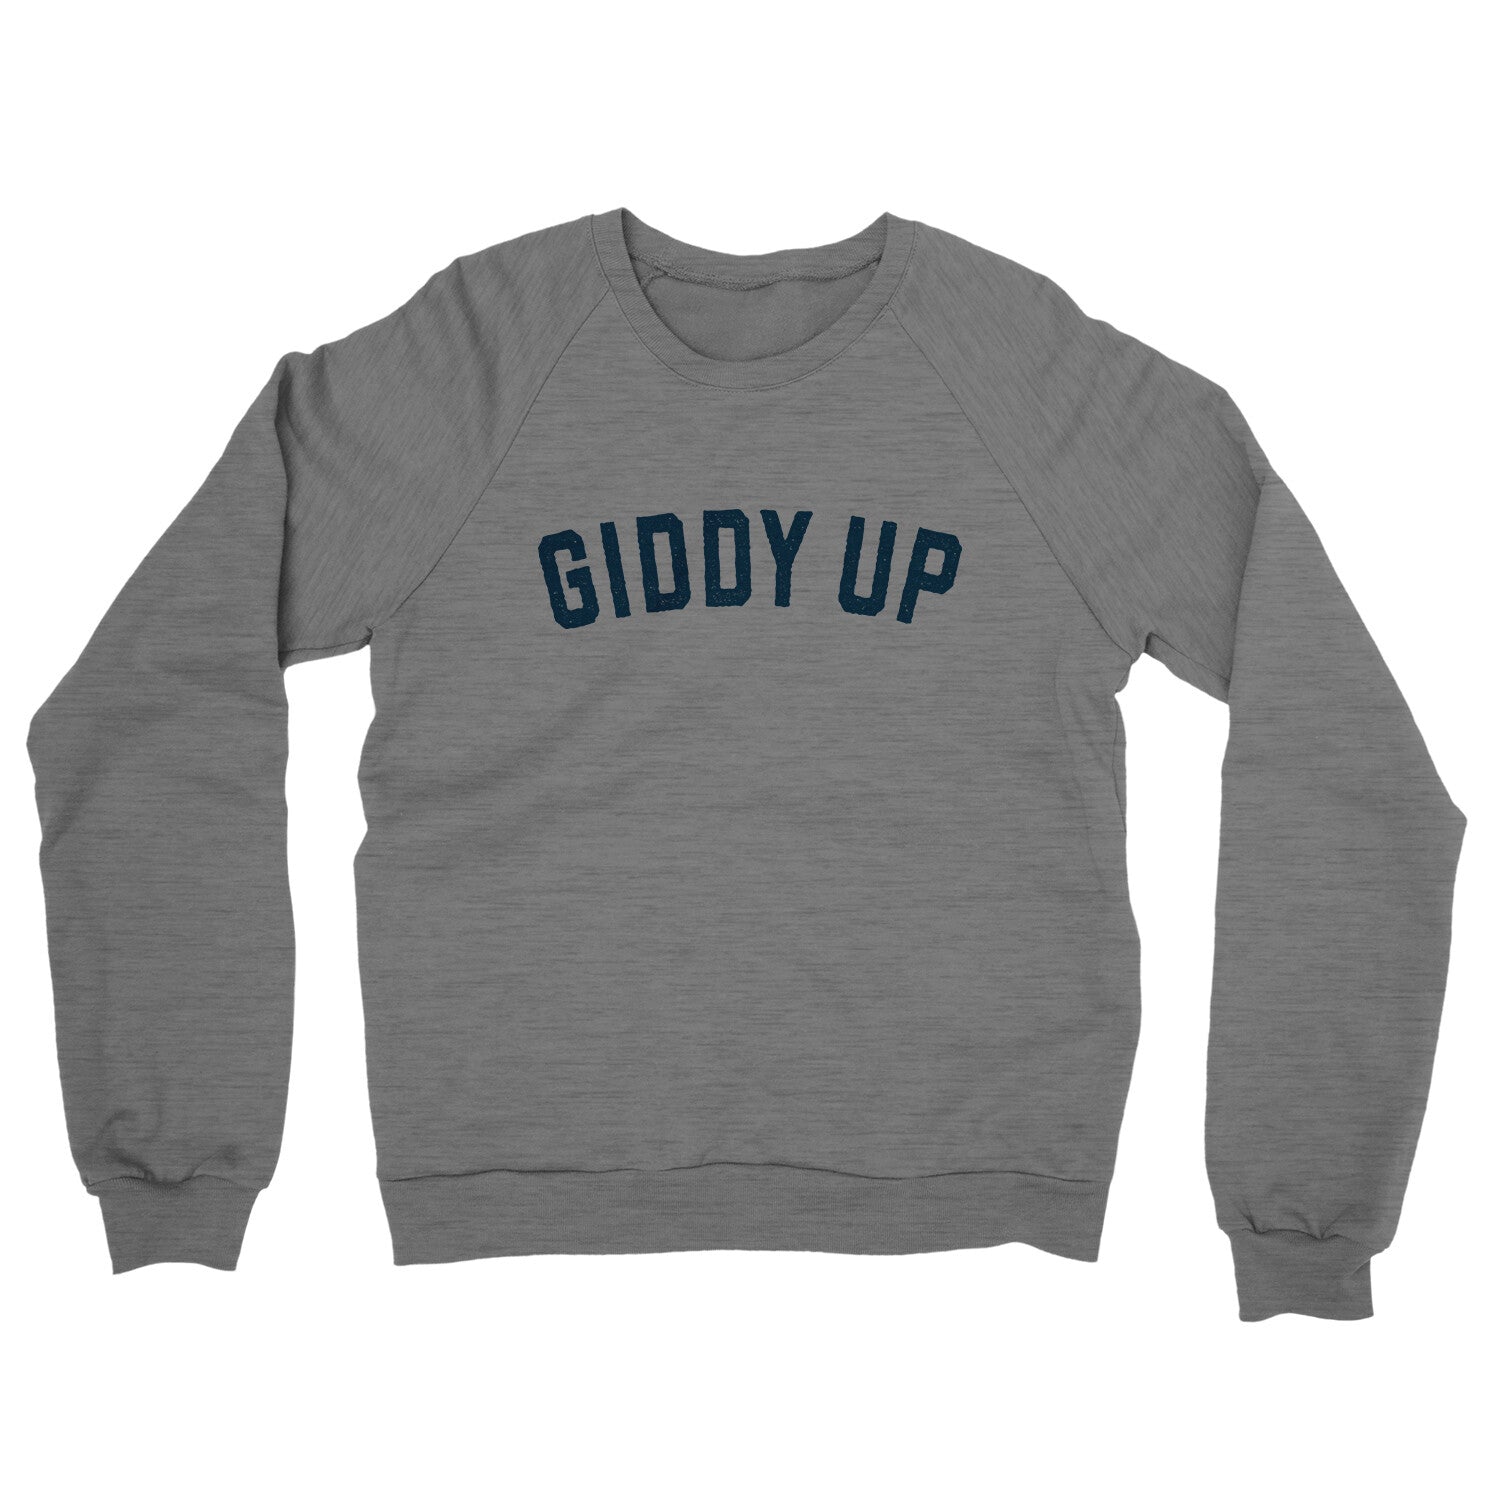 Giddy Up in Graphite Heather Color